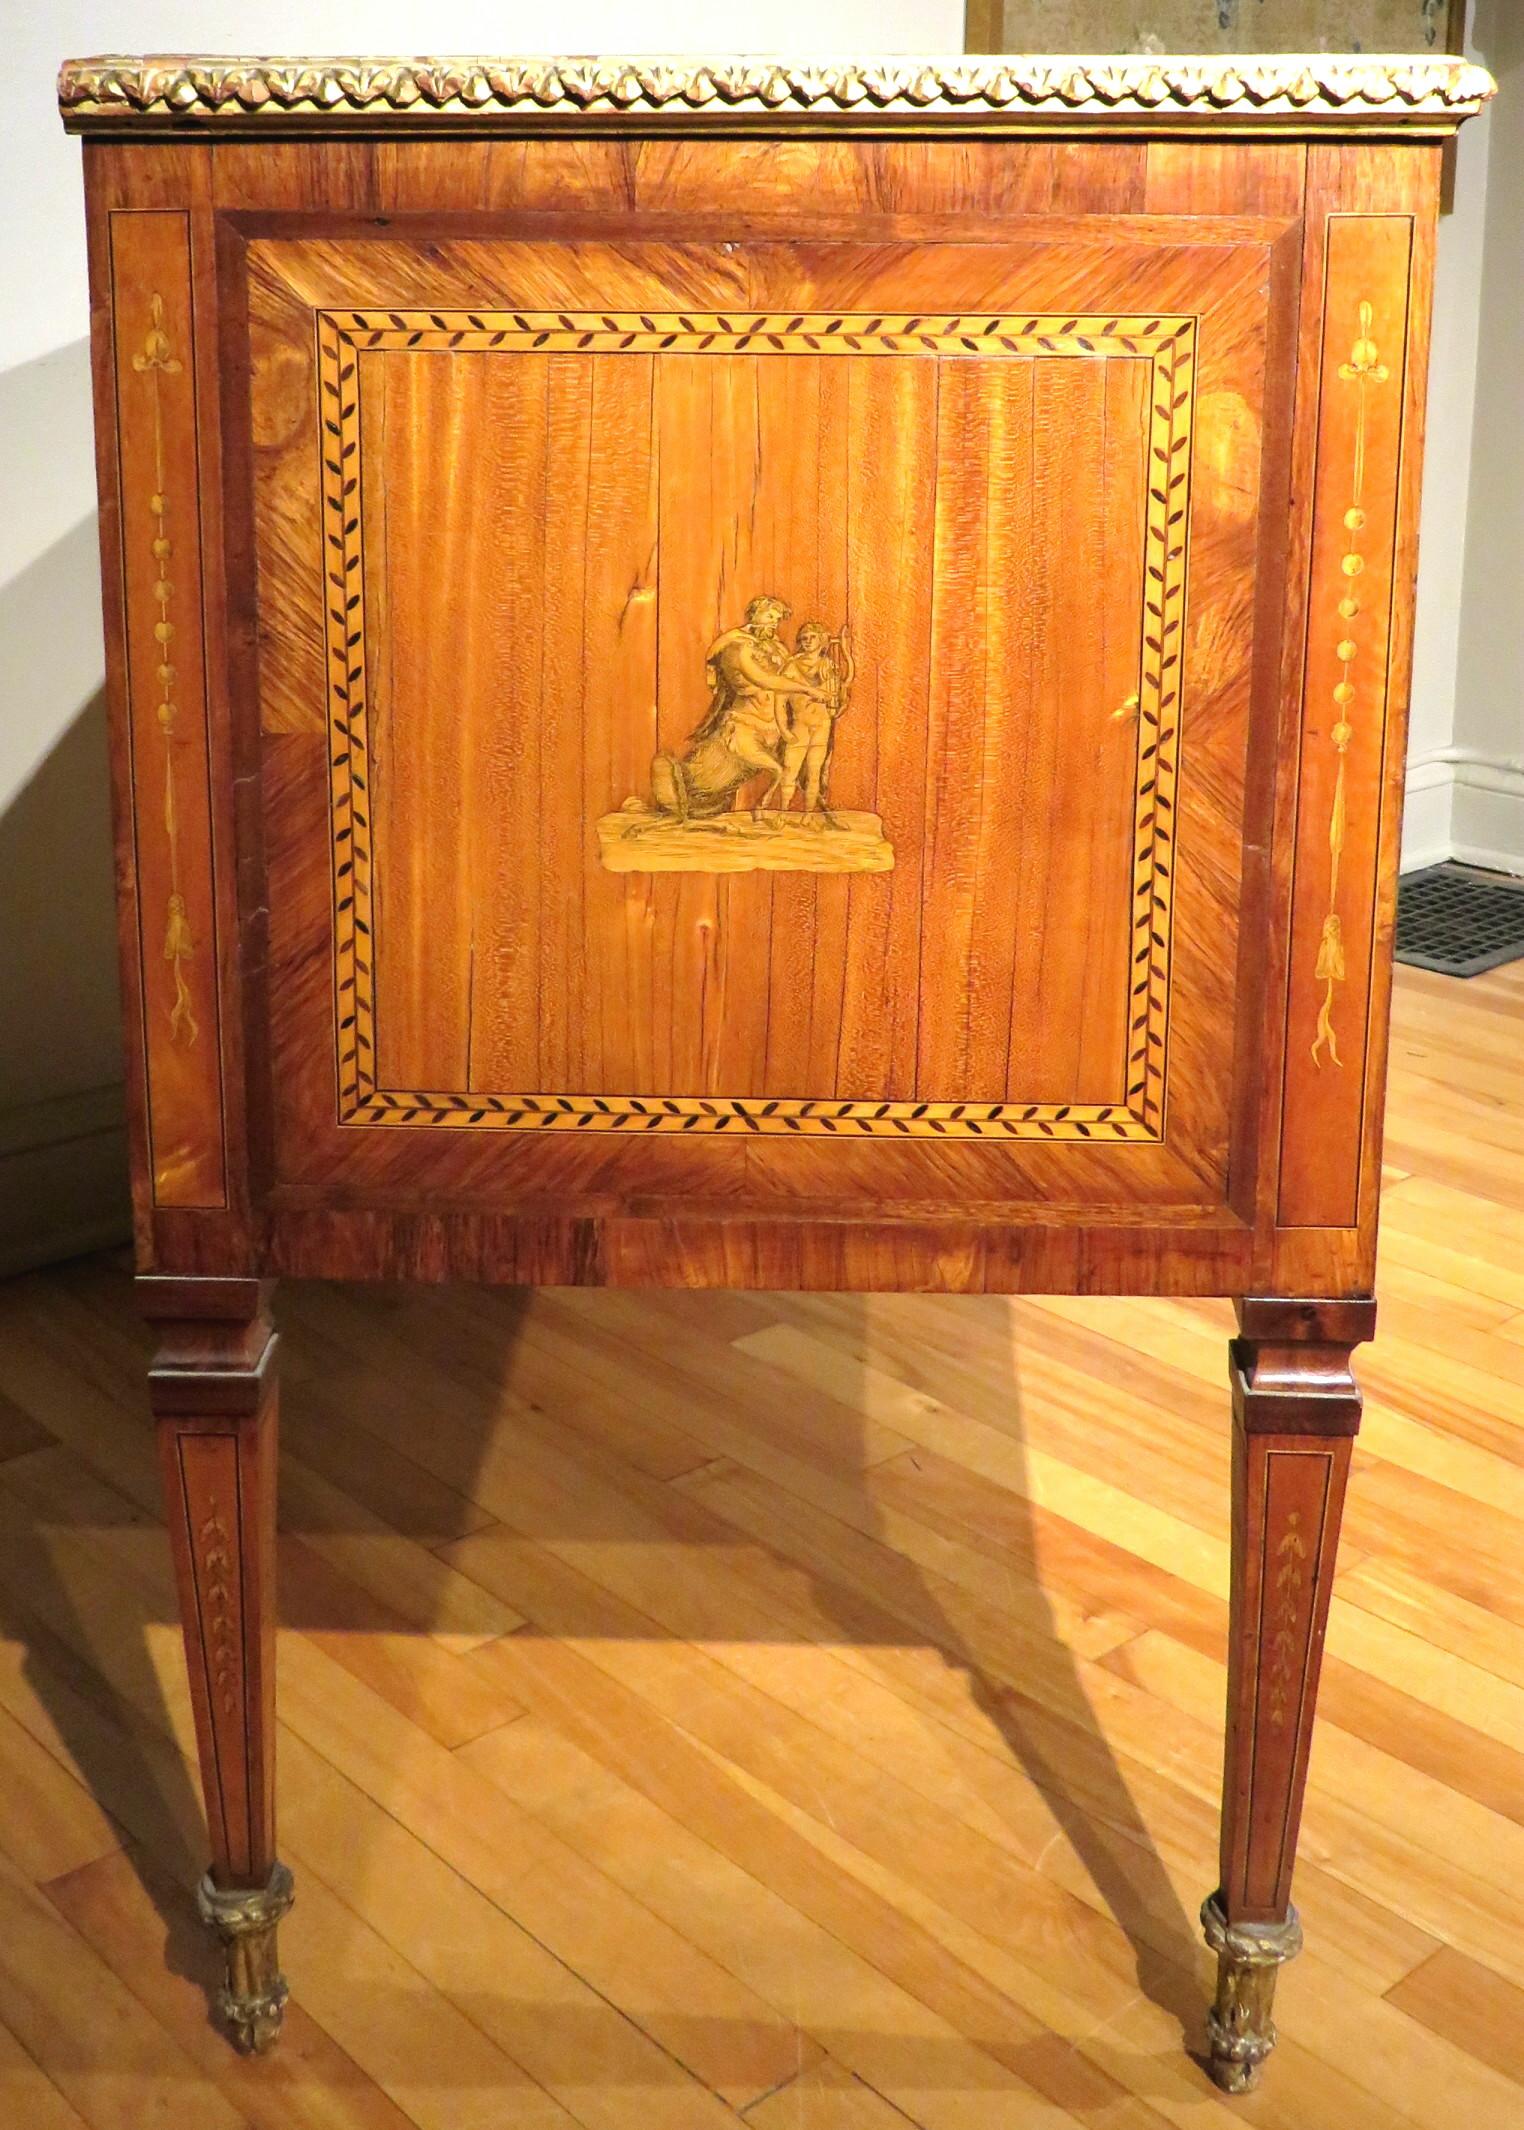 Exceptional 18th Century Italian Neoclassical Parquetry and Marquetry Commode In Good Condition For Sale In Ottawa, Ontario